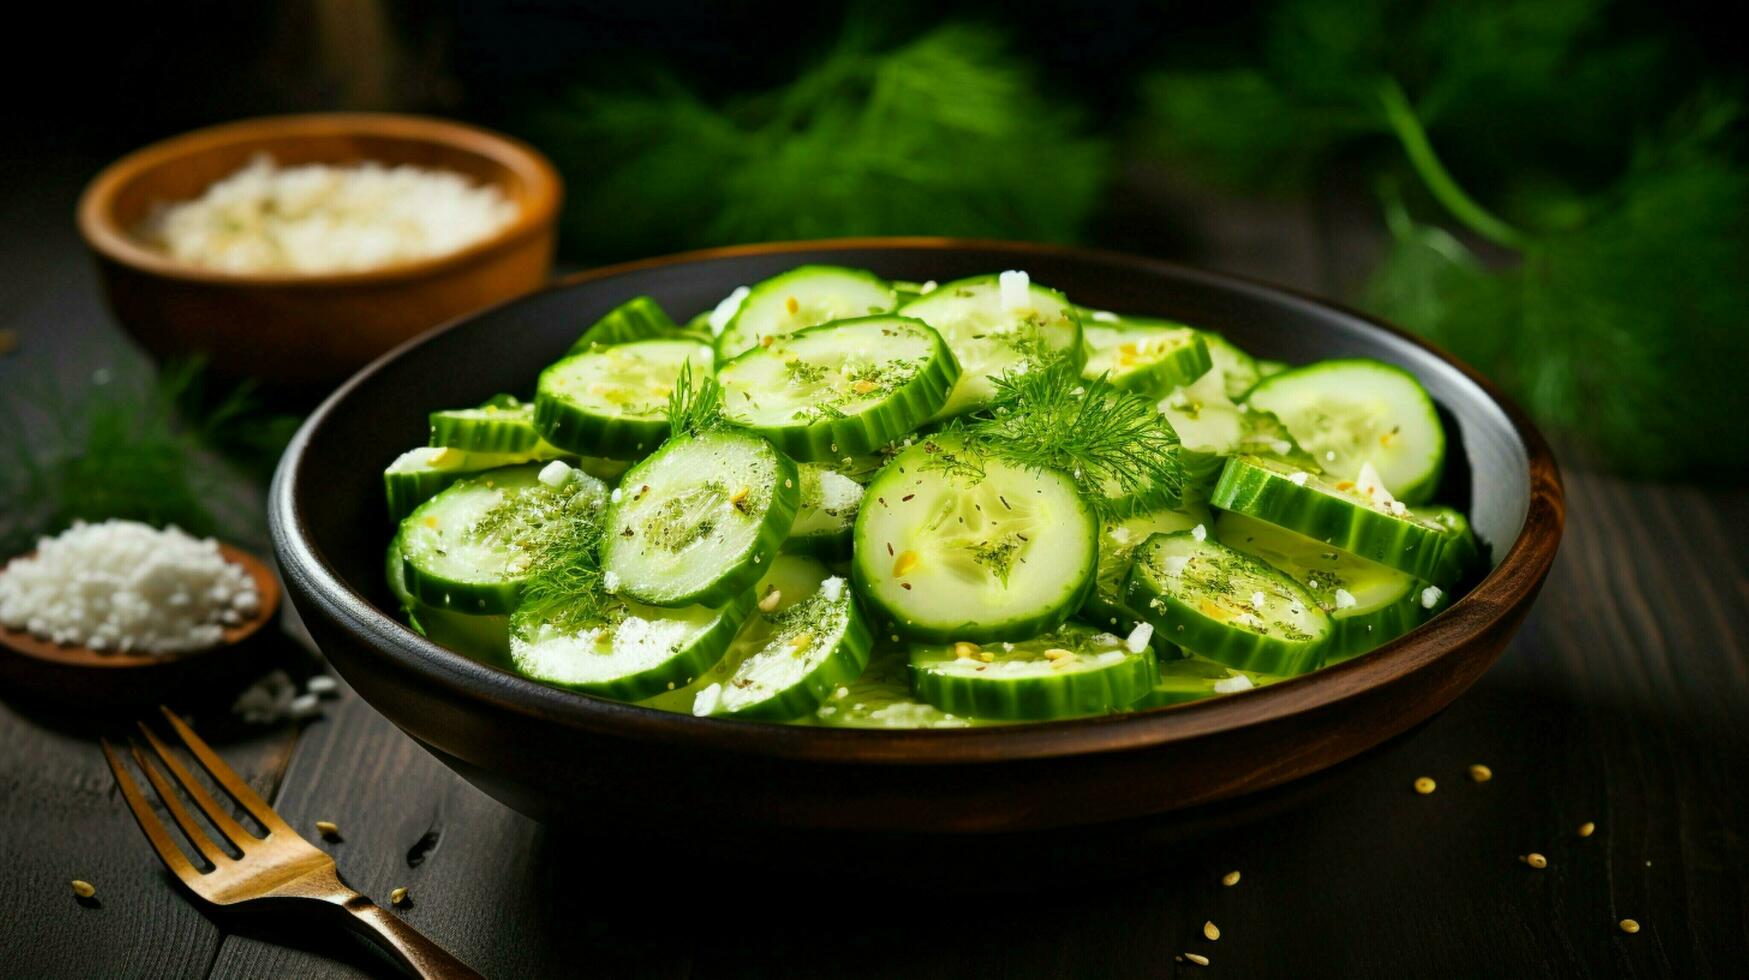 fresh cucumber salad a healthy gourmet meal with organic photo